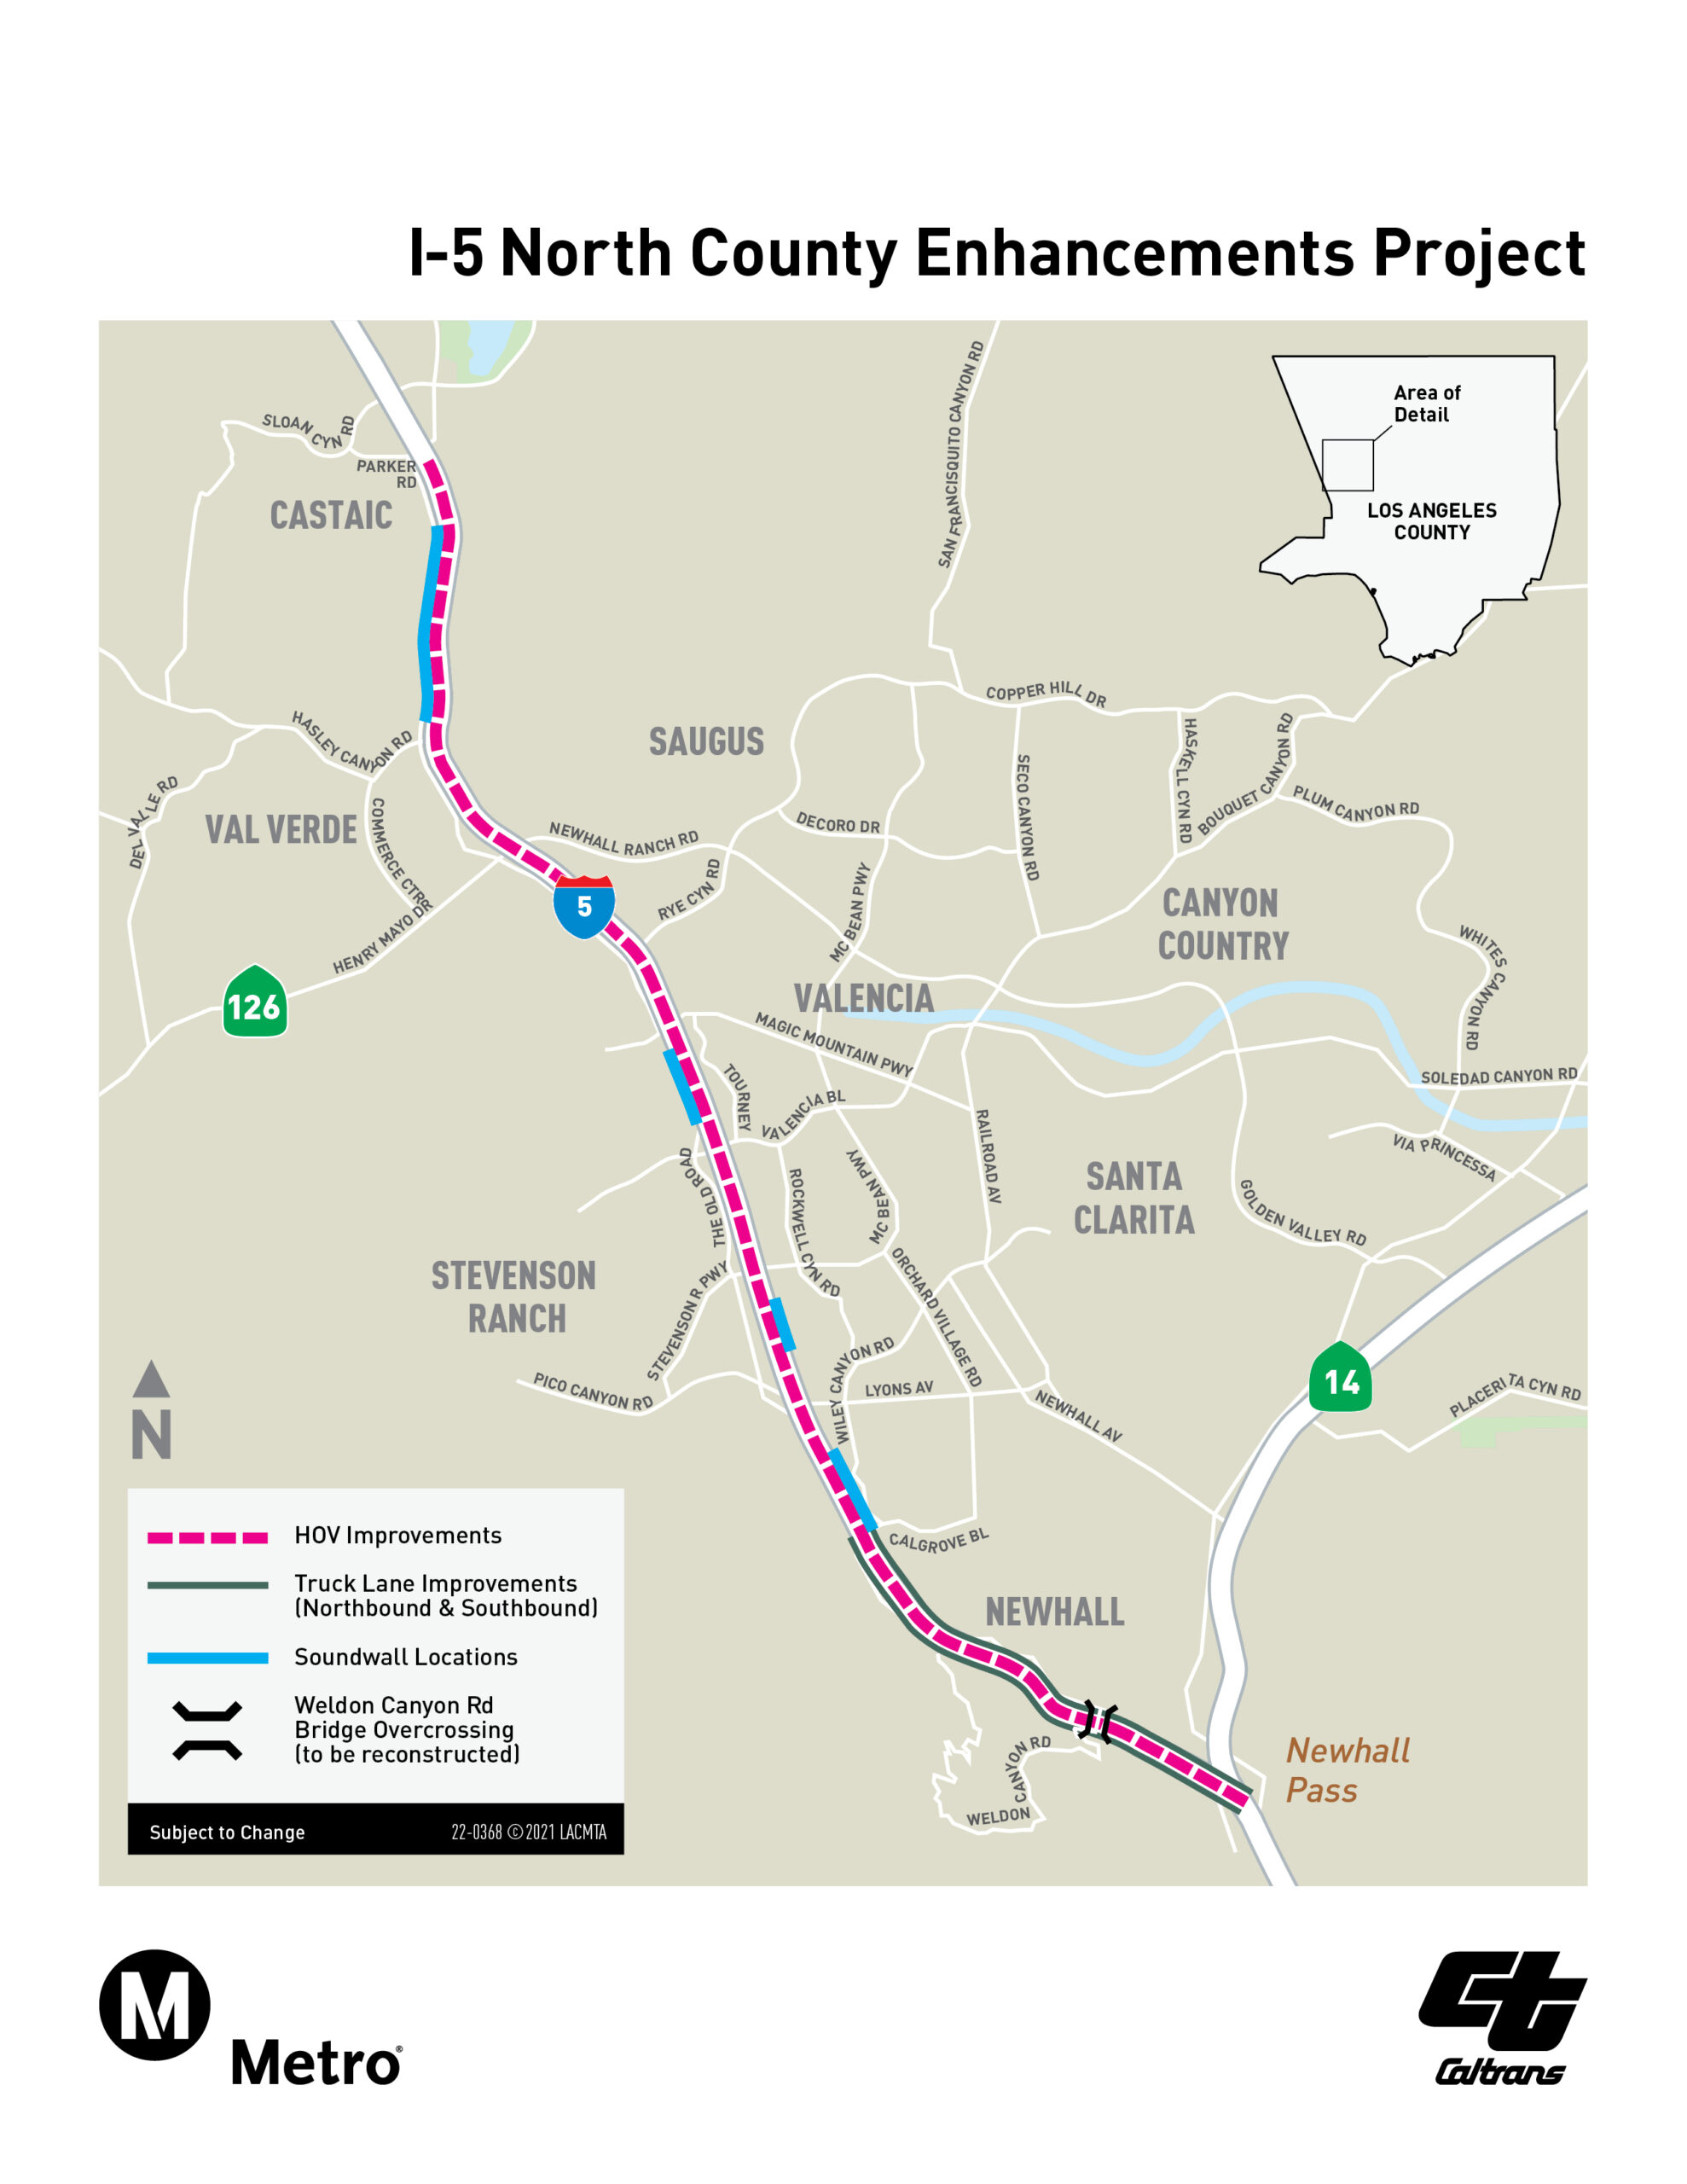 I-5 North County Enhancements Project Map